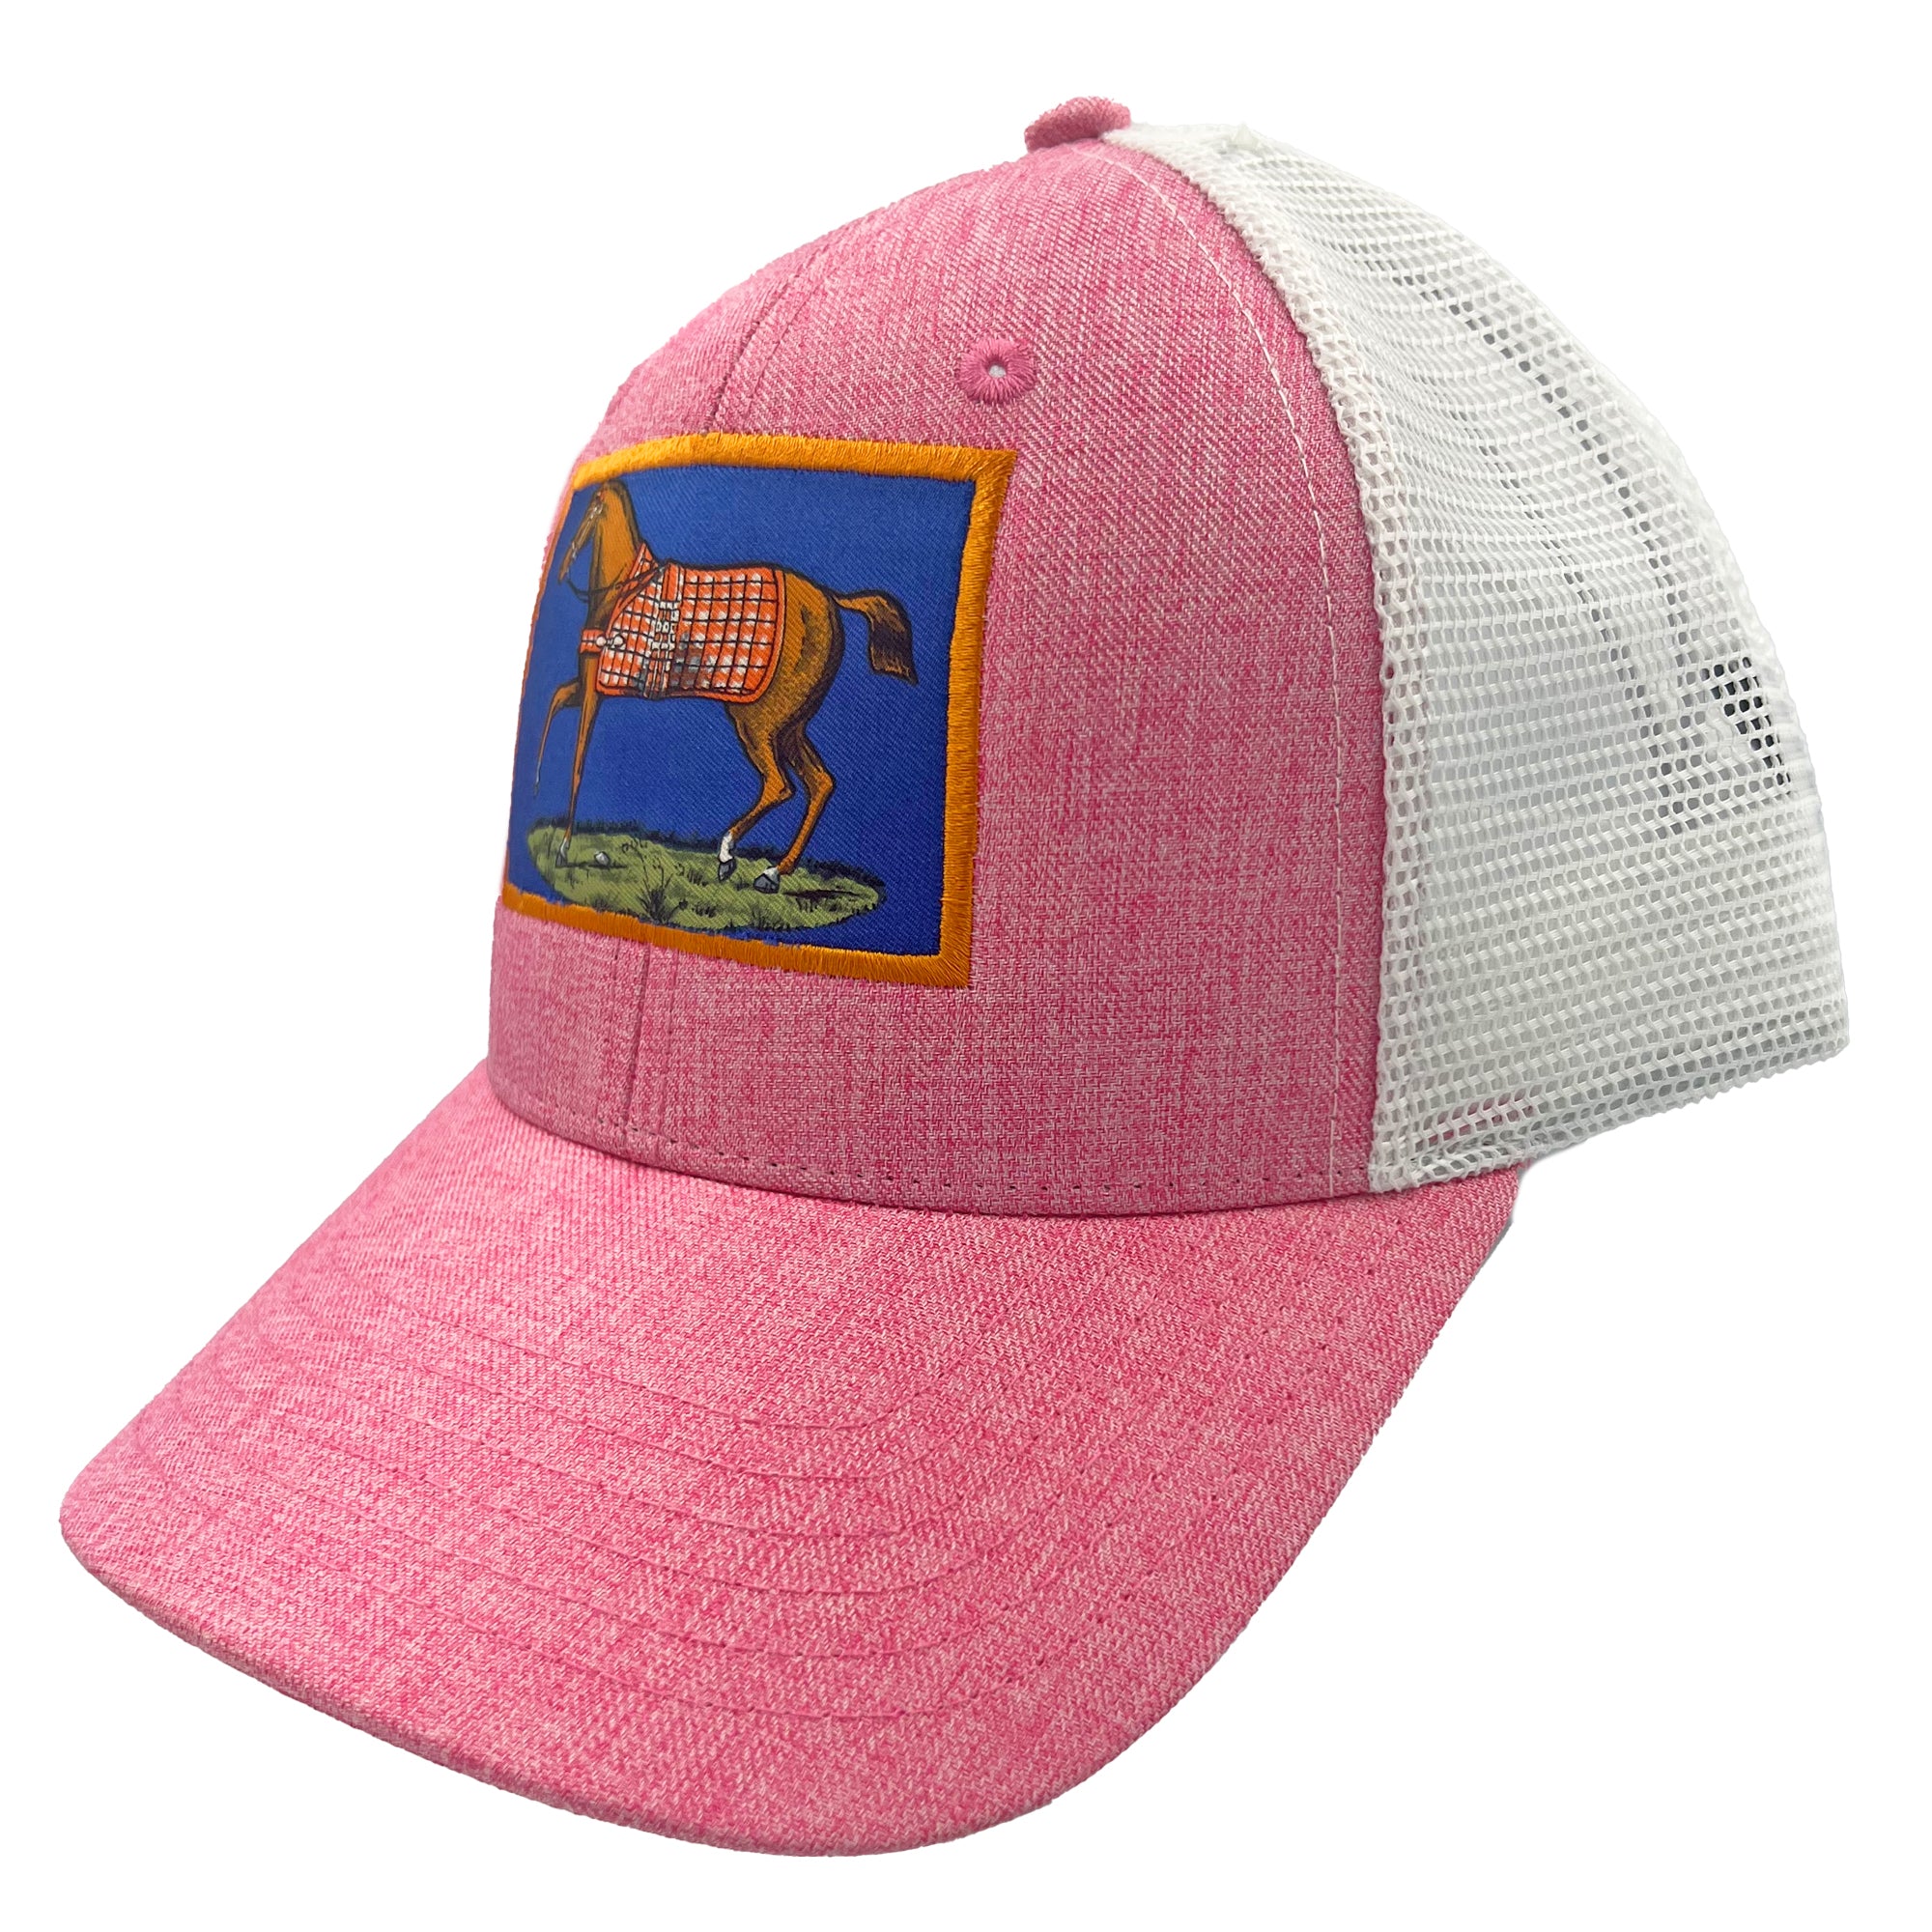 Ball Cap Pony Tail Equestrian - Pink / White